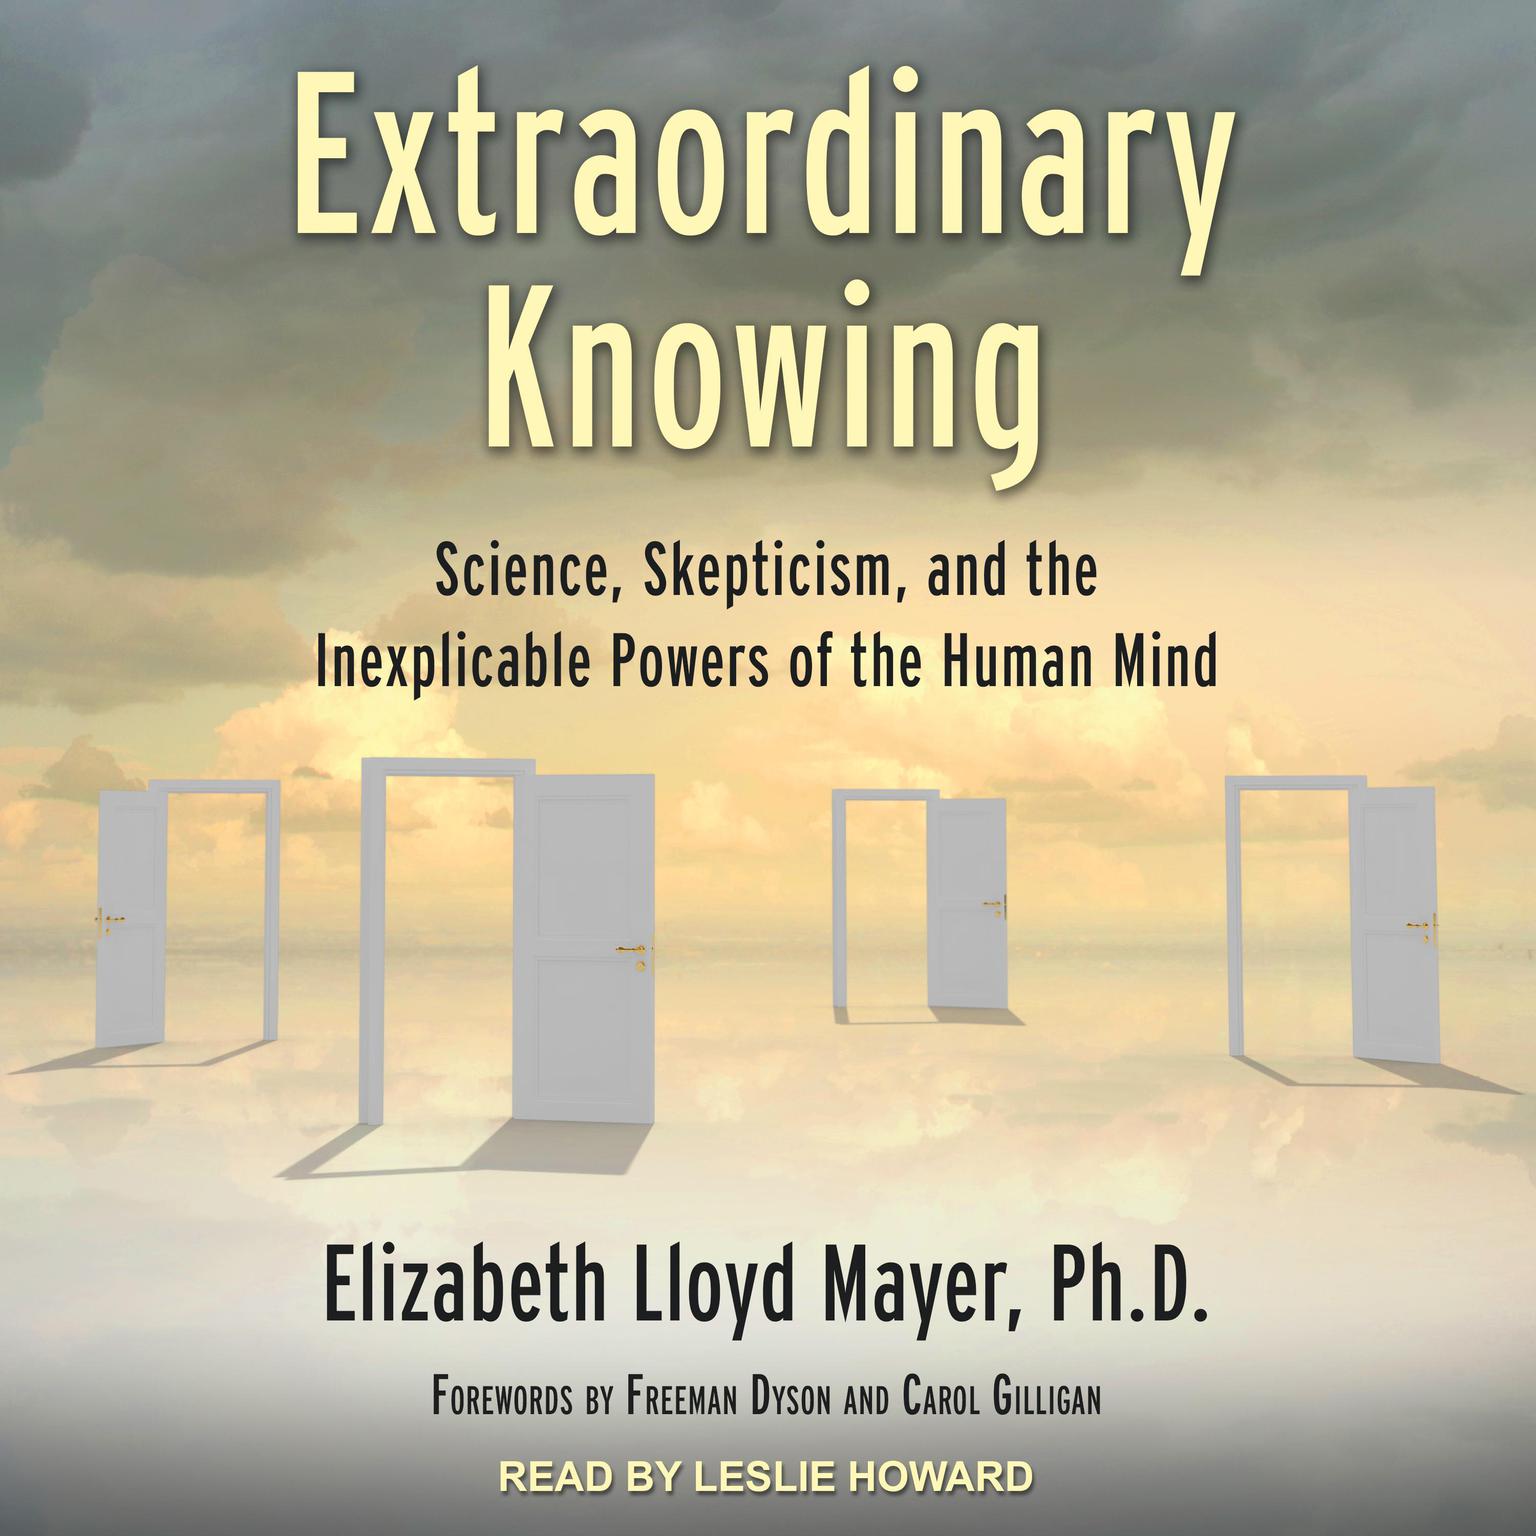 Extraordinary Knowing: Science, Skepticism, and the Inexplicable Powers of the Human Mind Audiobook, by Elizabeth Lloyd Mayer